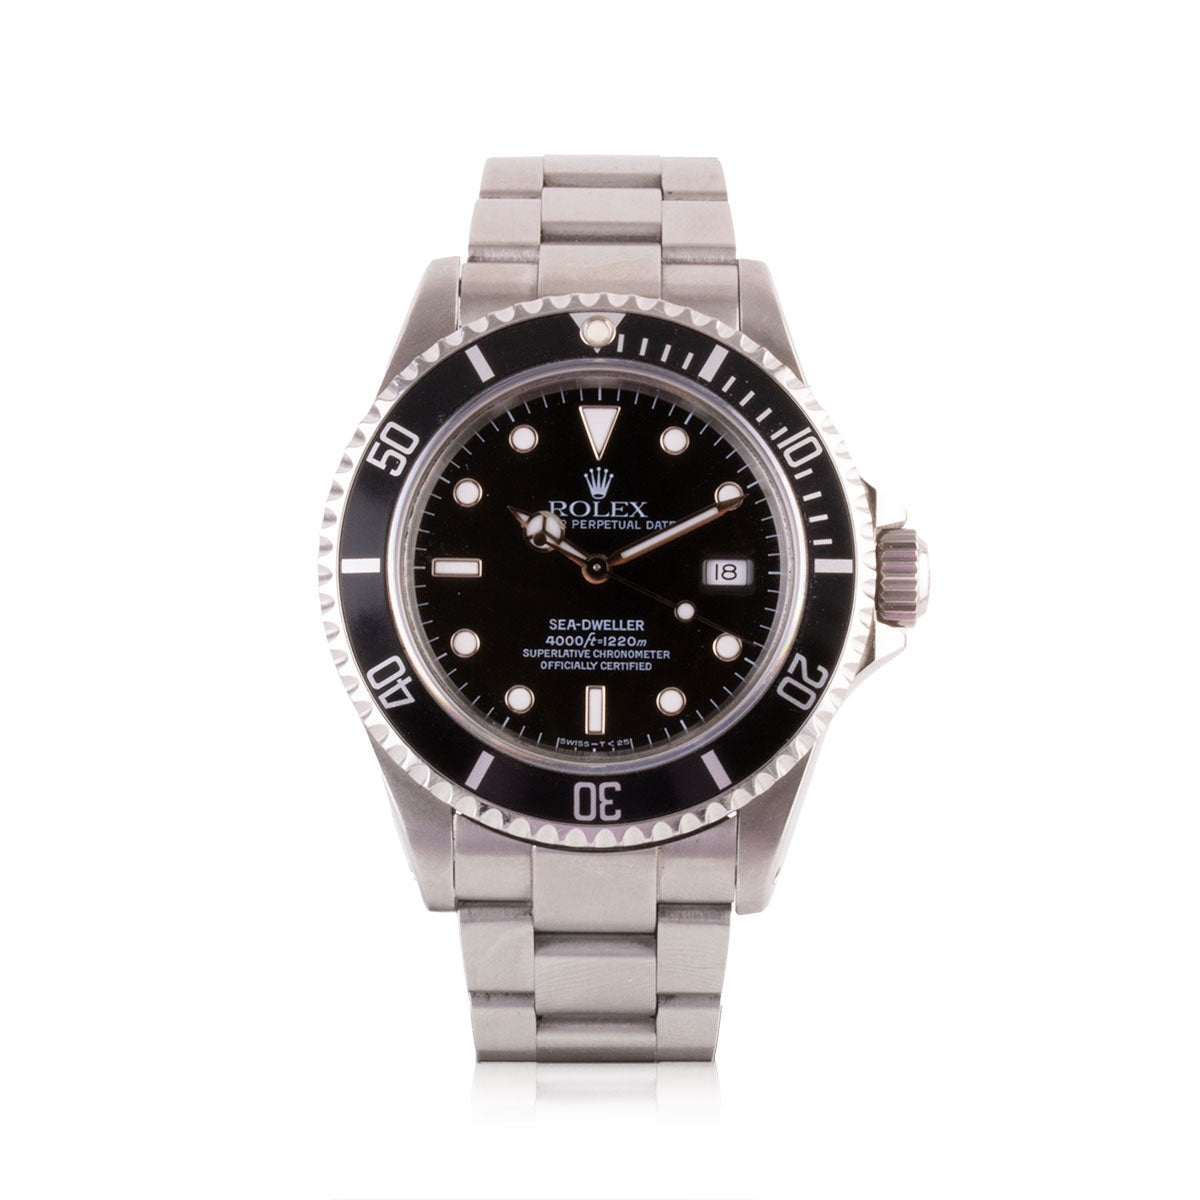 Montre d'occasion - Rolex - Oyster Perpetual Date Sea-Dweller - 14000€